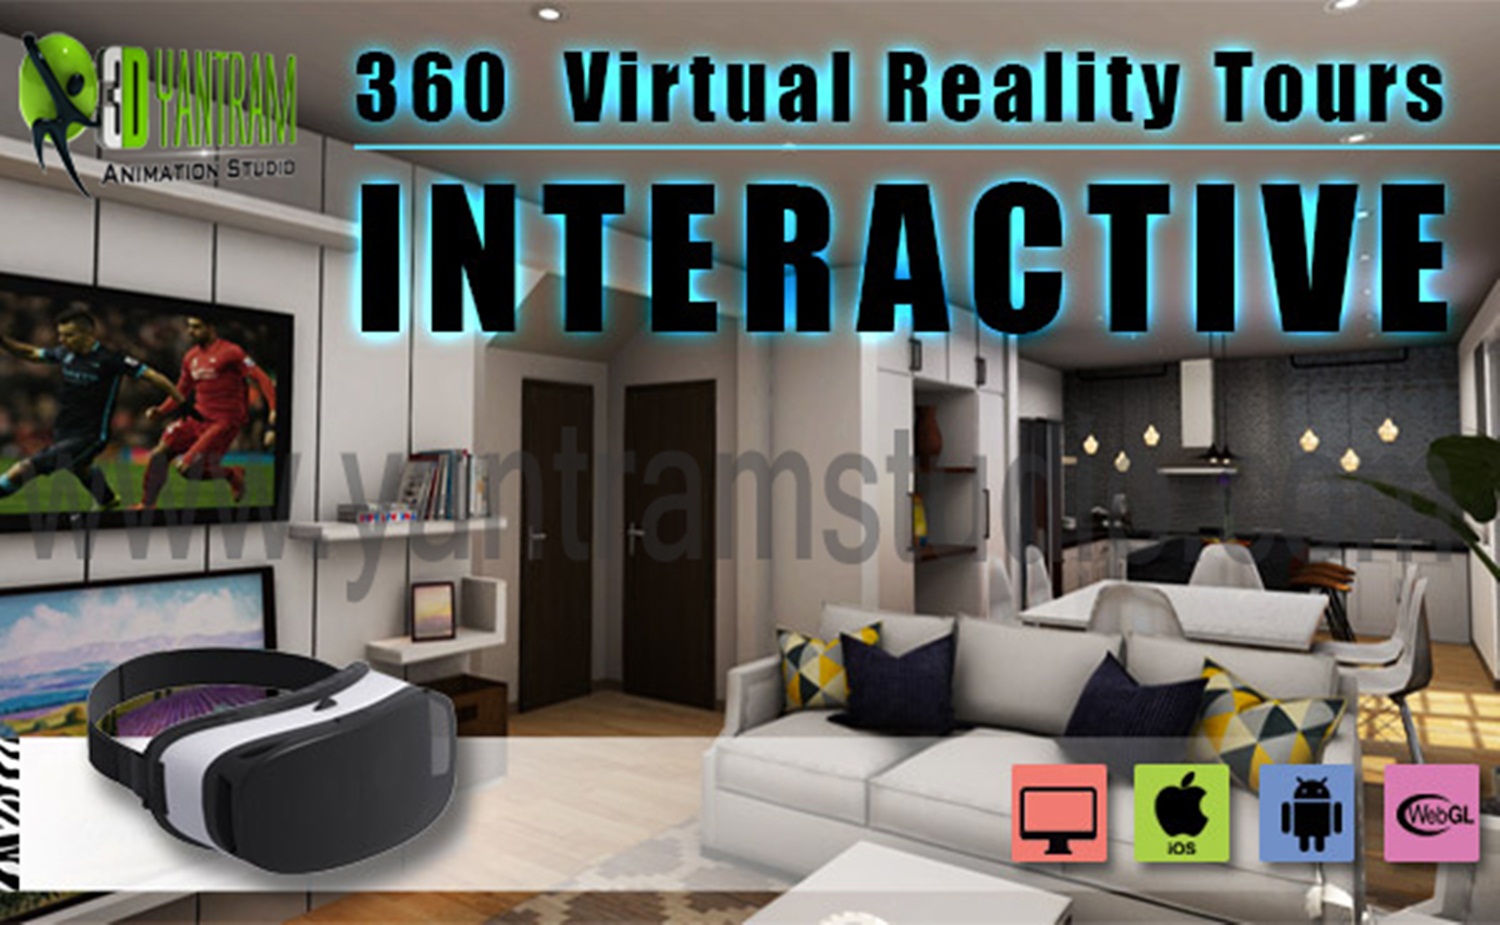 Interactive Interior App By Yantram virtual reality studio- Paris, France - VR Realstate marketing-oriented website that is well designed with calls to action can literally catapult your real estate business to the next level. Ninety-two percent by Yantramarchitecturaldesignstudio